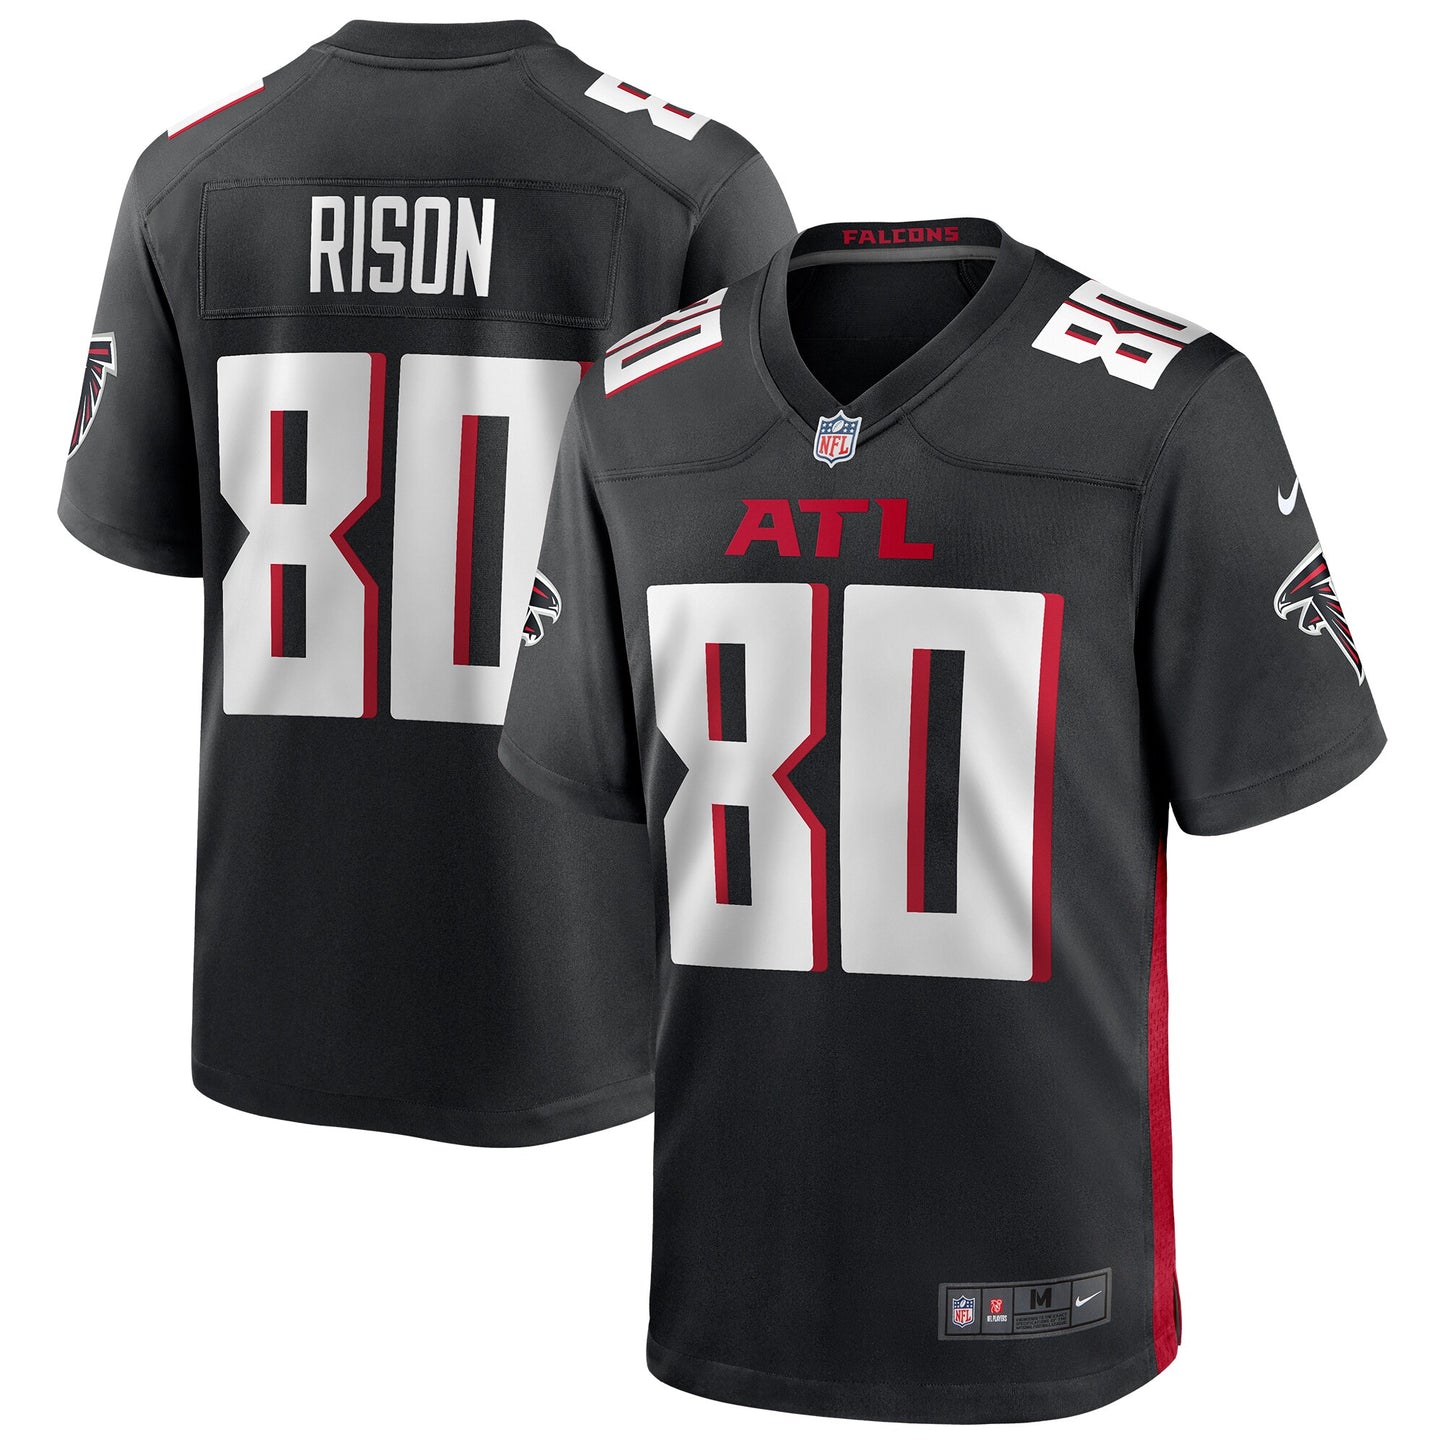 Andre Rison Atlanta Falcons Nike Game Retired Player Jersey - Black